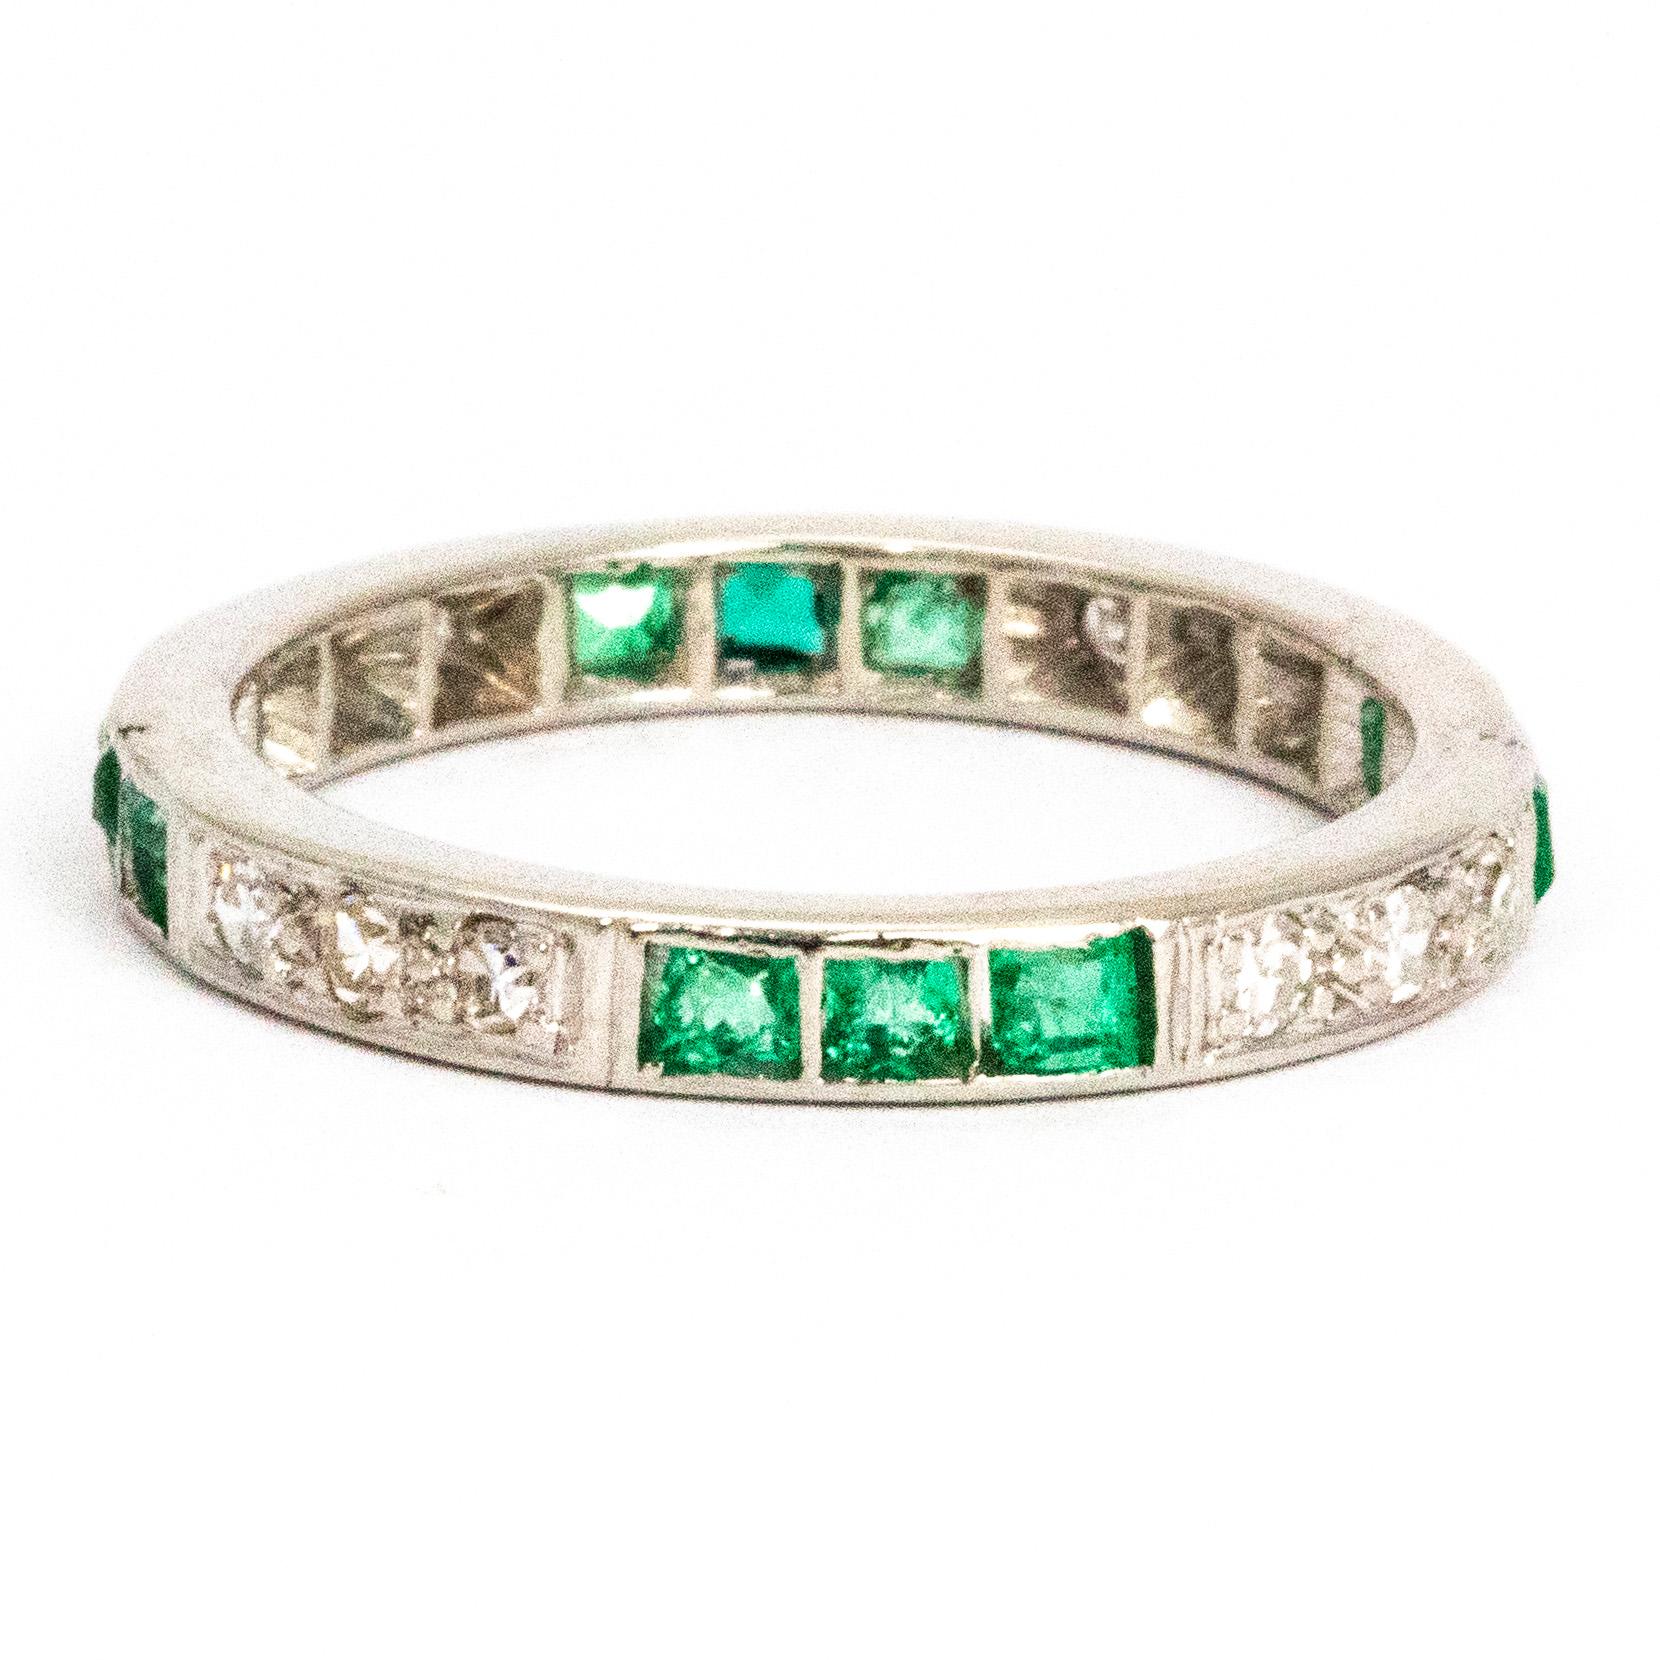 This gorgeous emerald and diamond eternity is a real stunner. The round cut diamonds and square cut emeralds sit in sparkling trios within the platinum band. Each diamond measures 5pts and each emerald measures 10pts.

Ring Size: O or 7
Band Width: